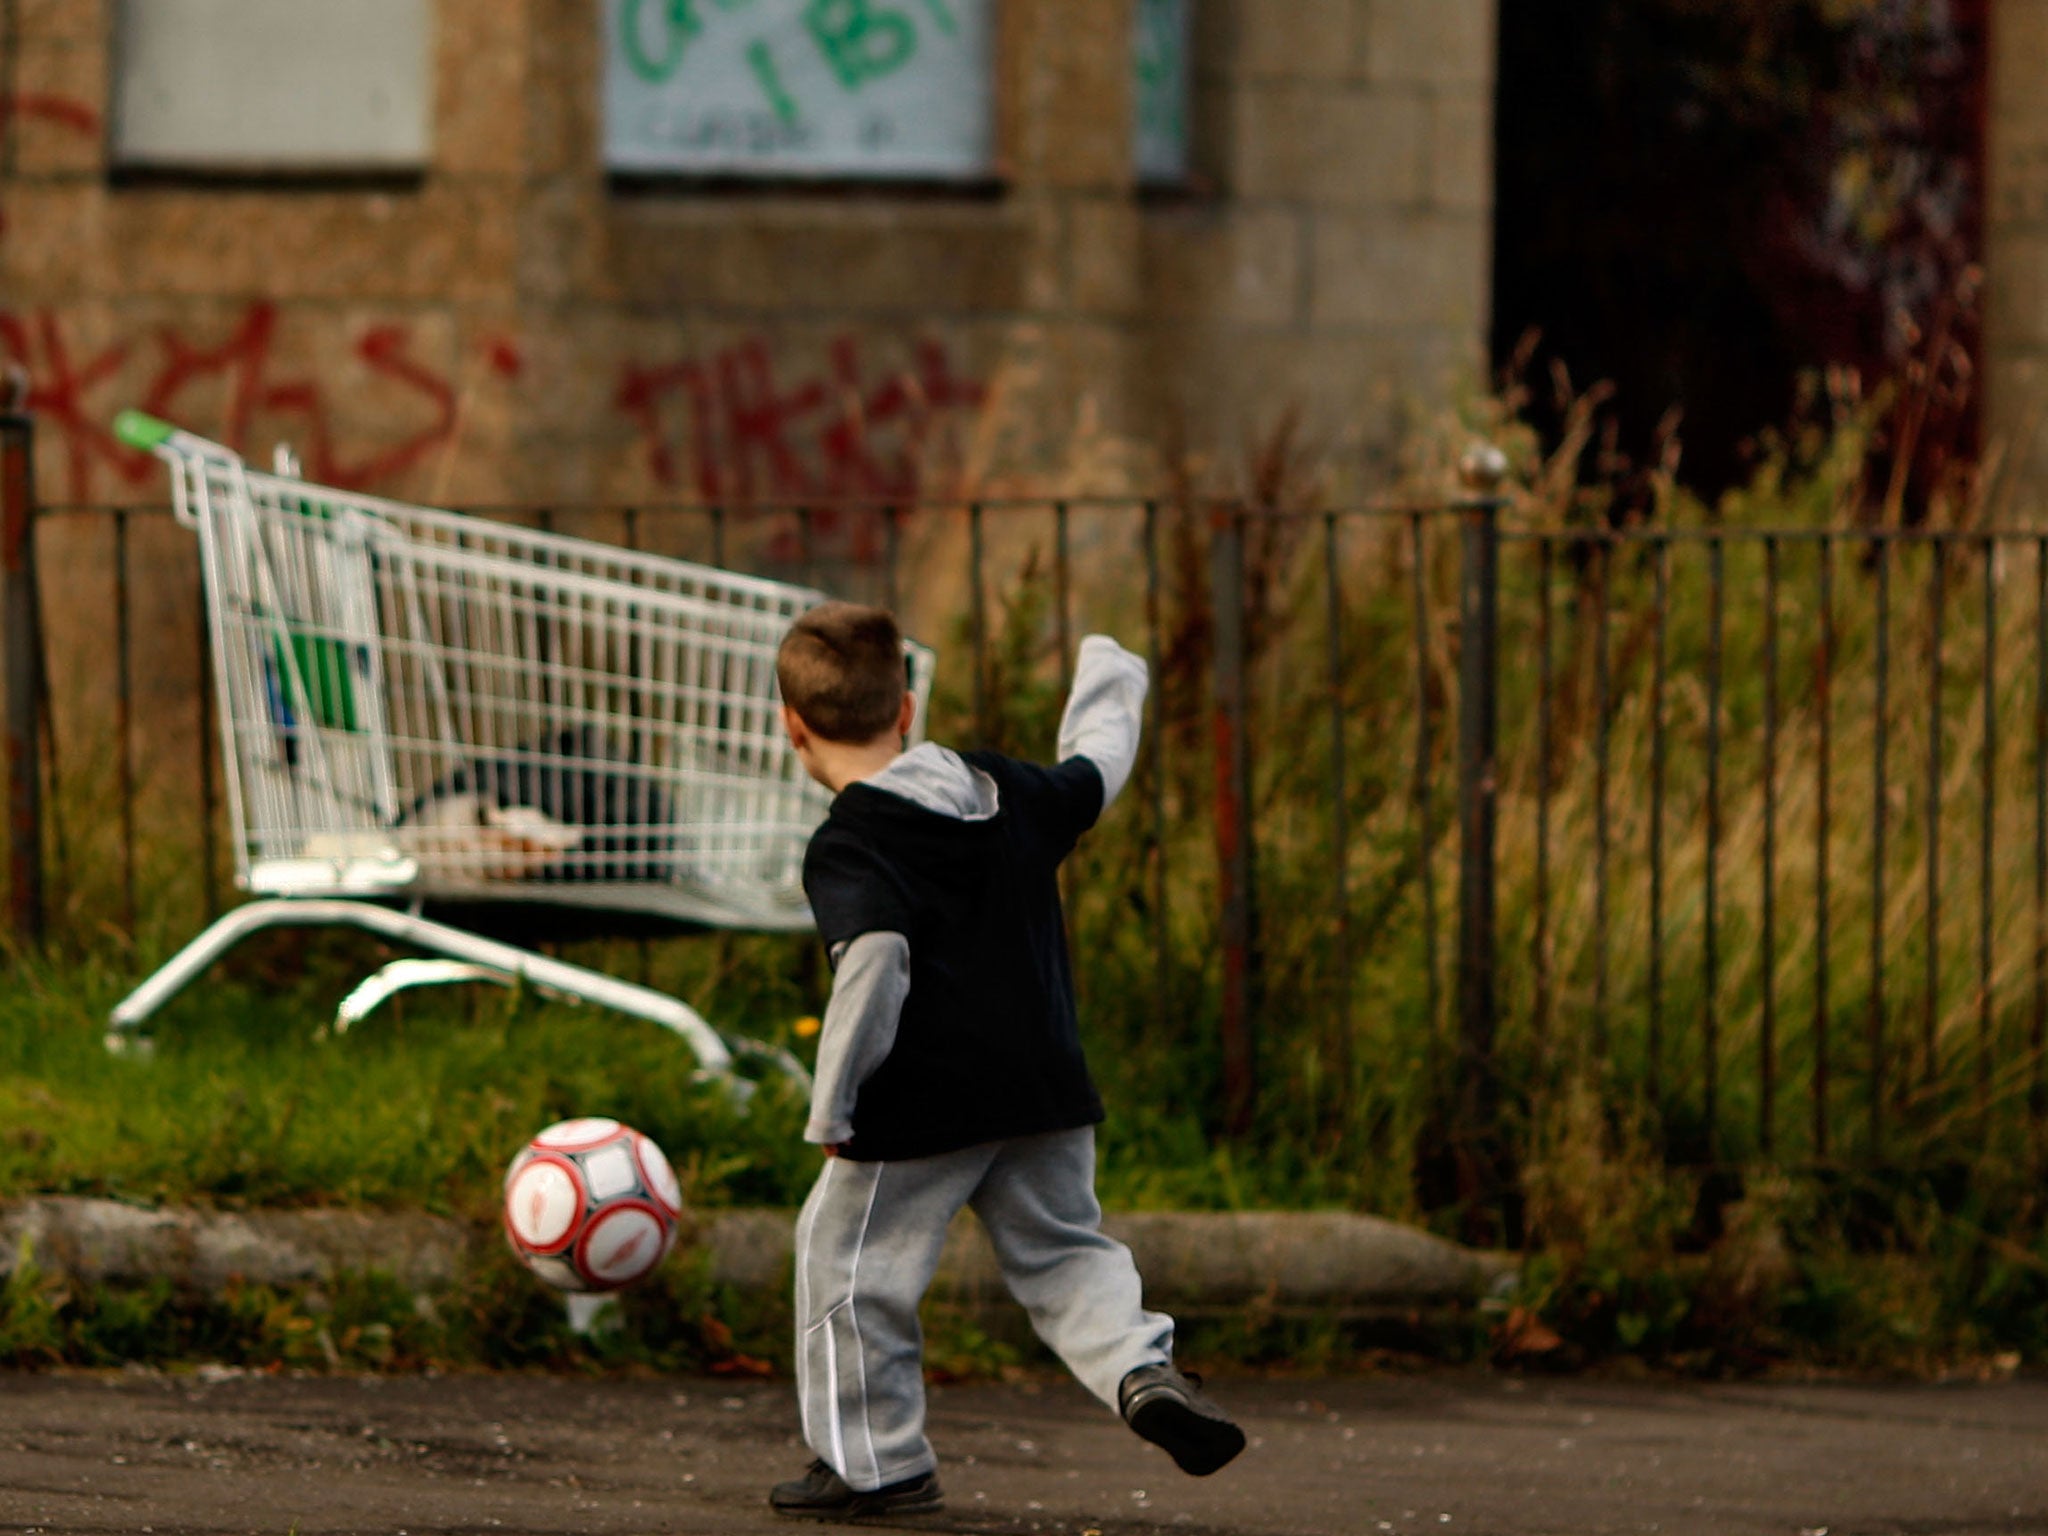 A young boy play's football in a street in Govan